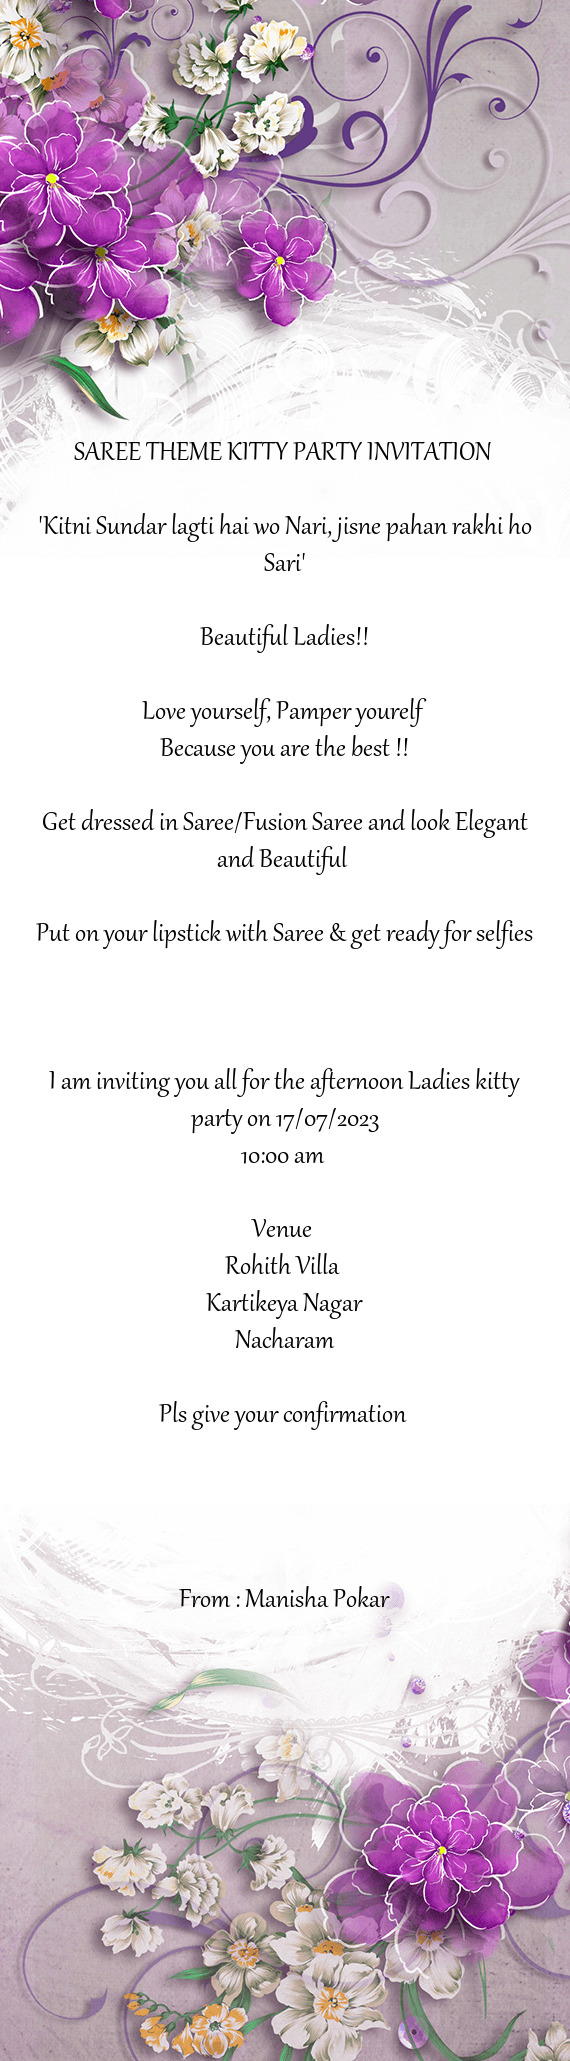 I am inviting you all for the afternoon Ladies kitty party on 17/07/2023